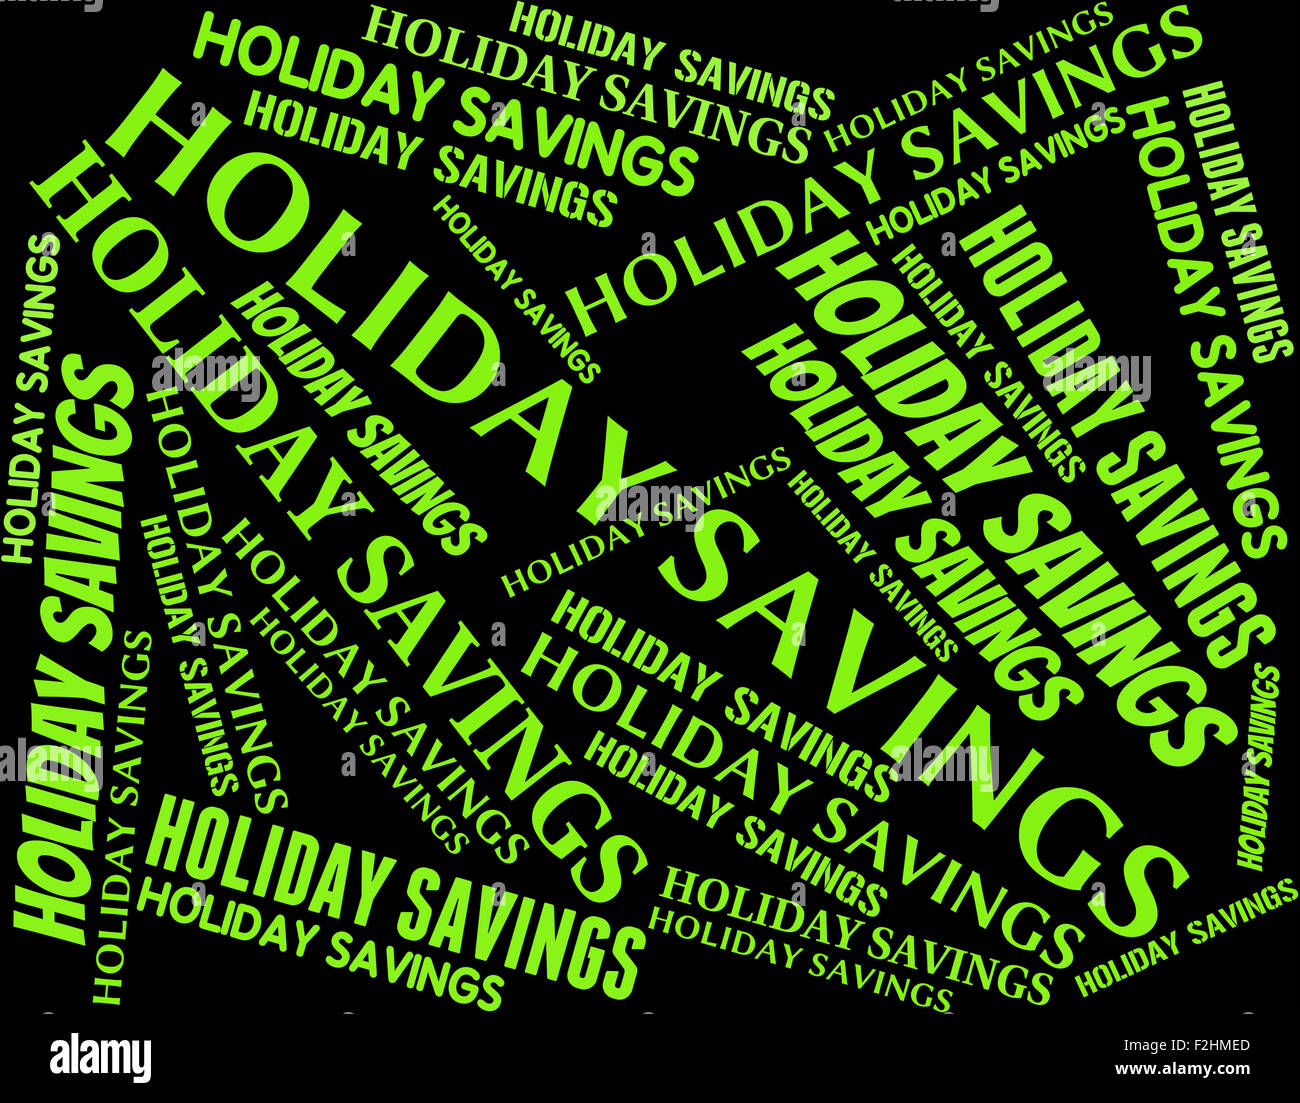 Holiday Savings Showing Go On Leave And Time Off Stock Photo